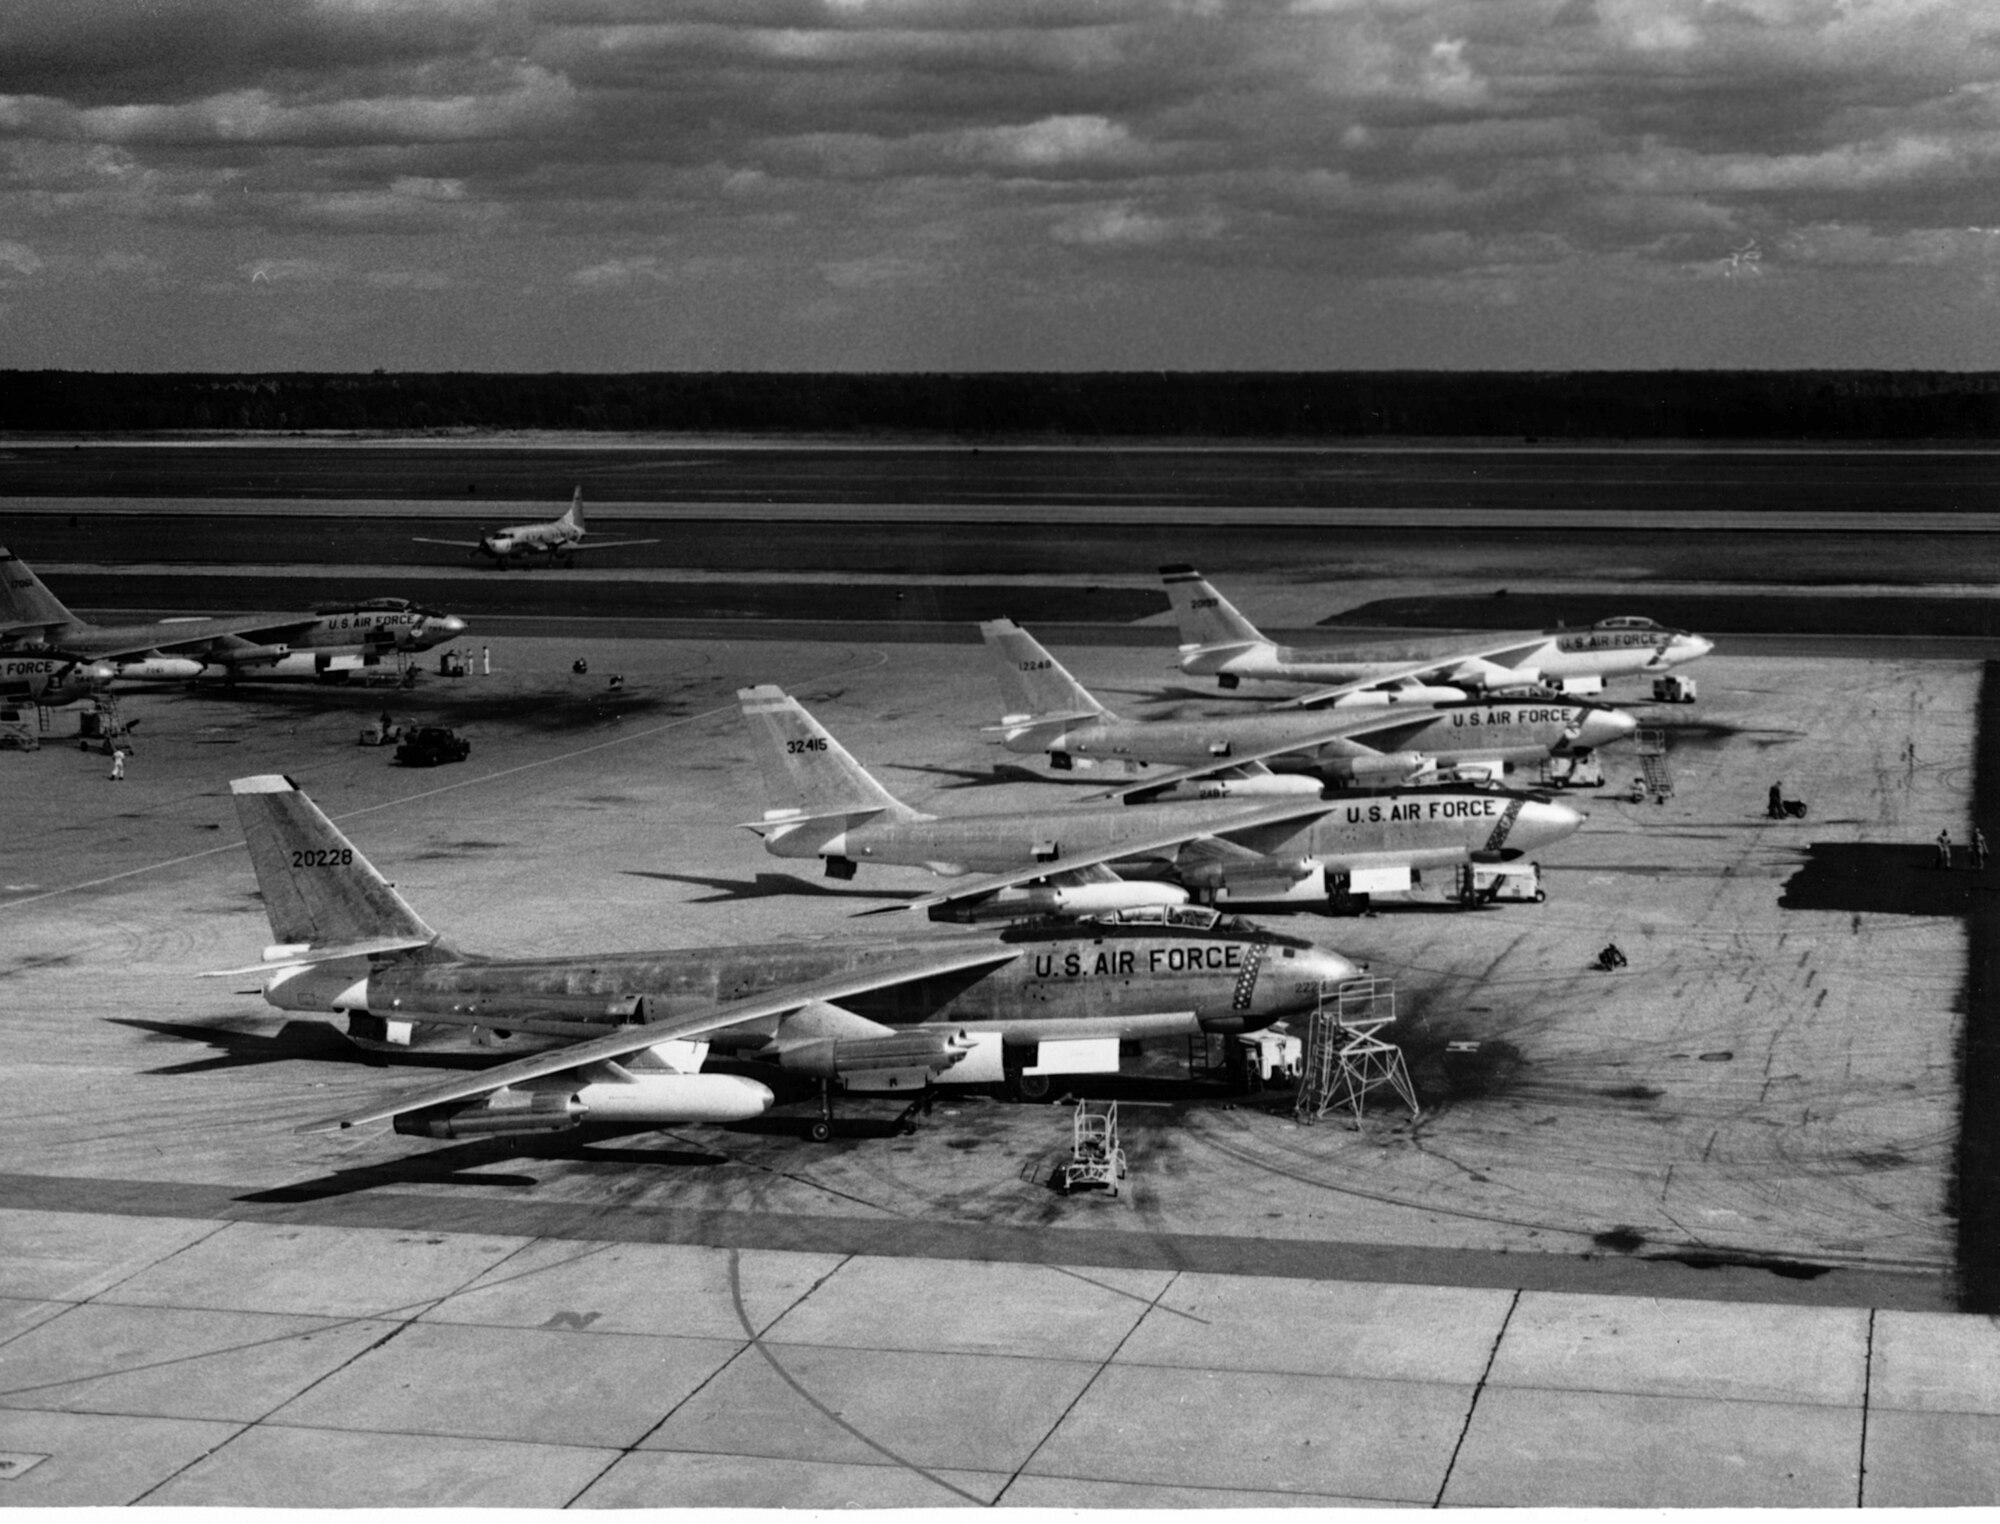 1950's -- The B-47E was an improved version of the -B model and more than 1500 were produced by Boeing, Douglas and Lockheed. Improvements incorporated into the -E model Stratojet included a more powerful version of the General Electric J47 turbojet and Rocket Assisted Take Off (RATO) packs with 18 or 33 rockets which were jettisoned after use. Other features of the B-47E included 20mm cannons in the tail instead of the .50-cal. machine guns of the -B model and upgraded avionics including the A-5 fire control system.